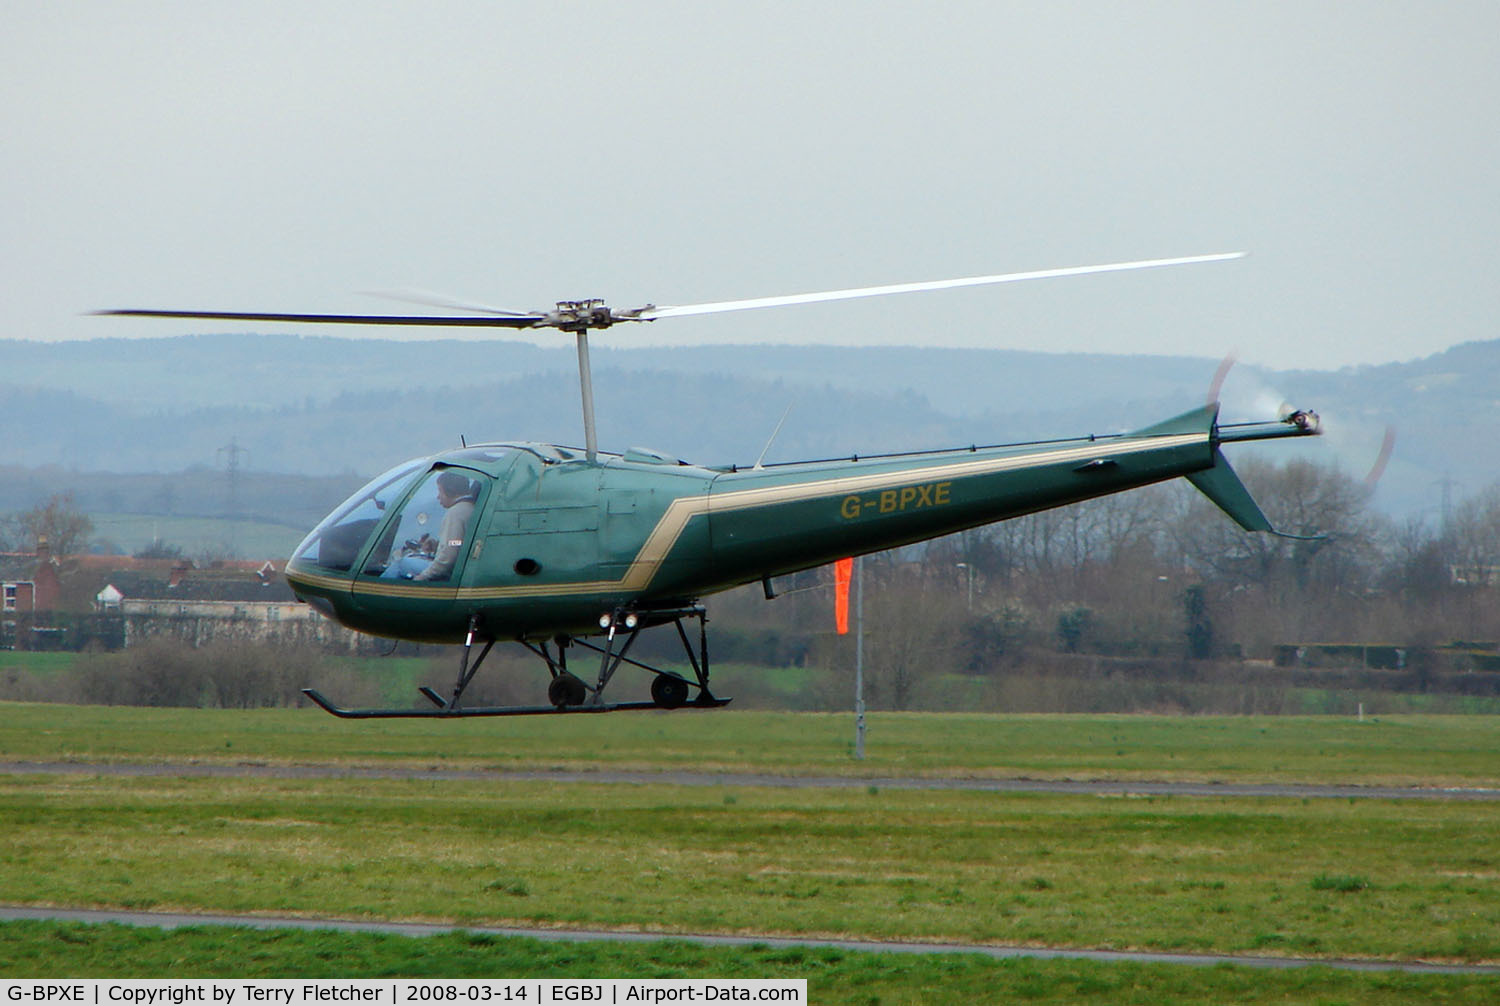 G-BPXE, 1977 Enstrom 280C Shark C/N 1089, A visitor to Gloucestershire Airport on the day of the horse racing Gold Cup  at the nearby Cheltenham Racecourse